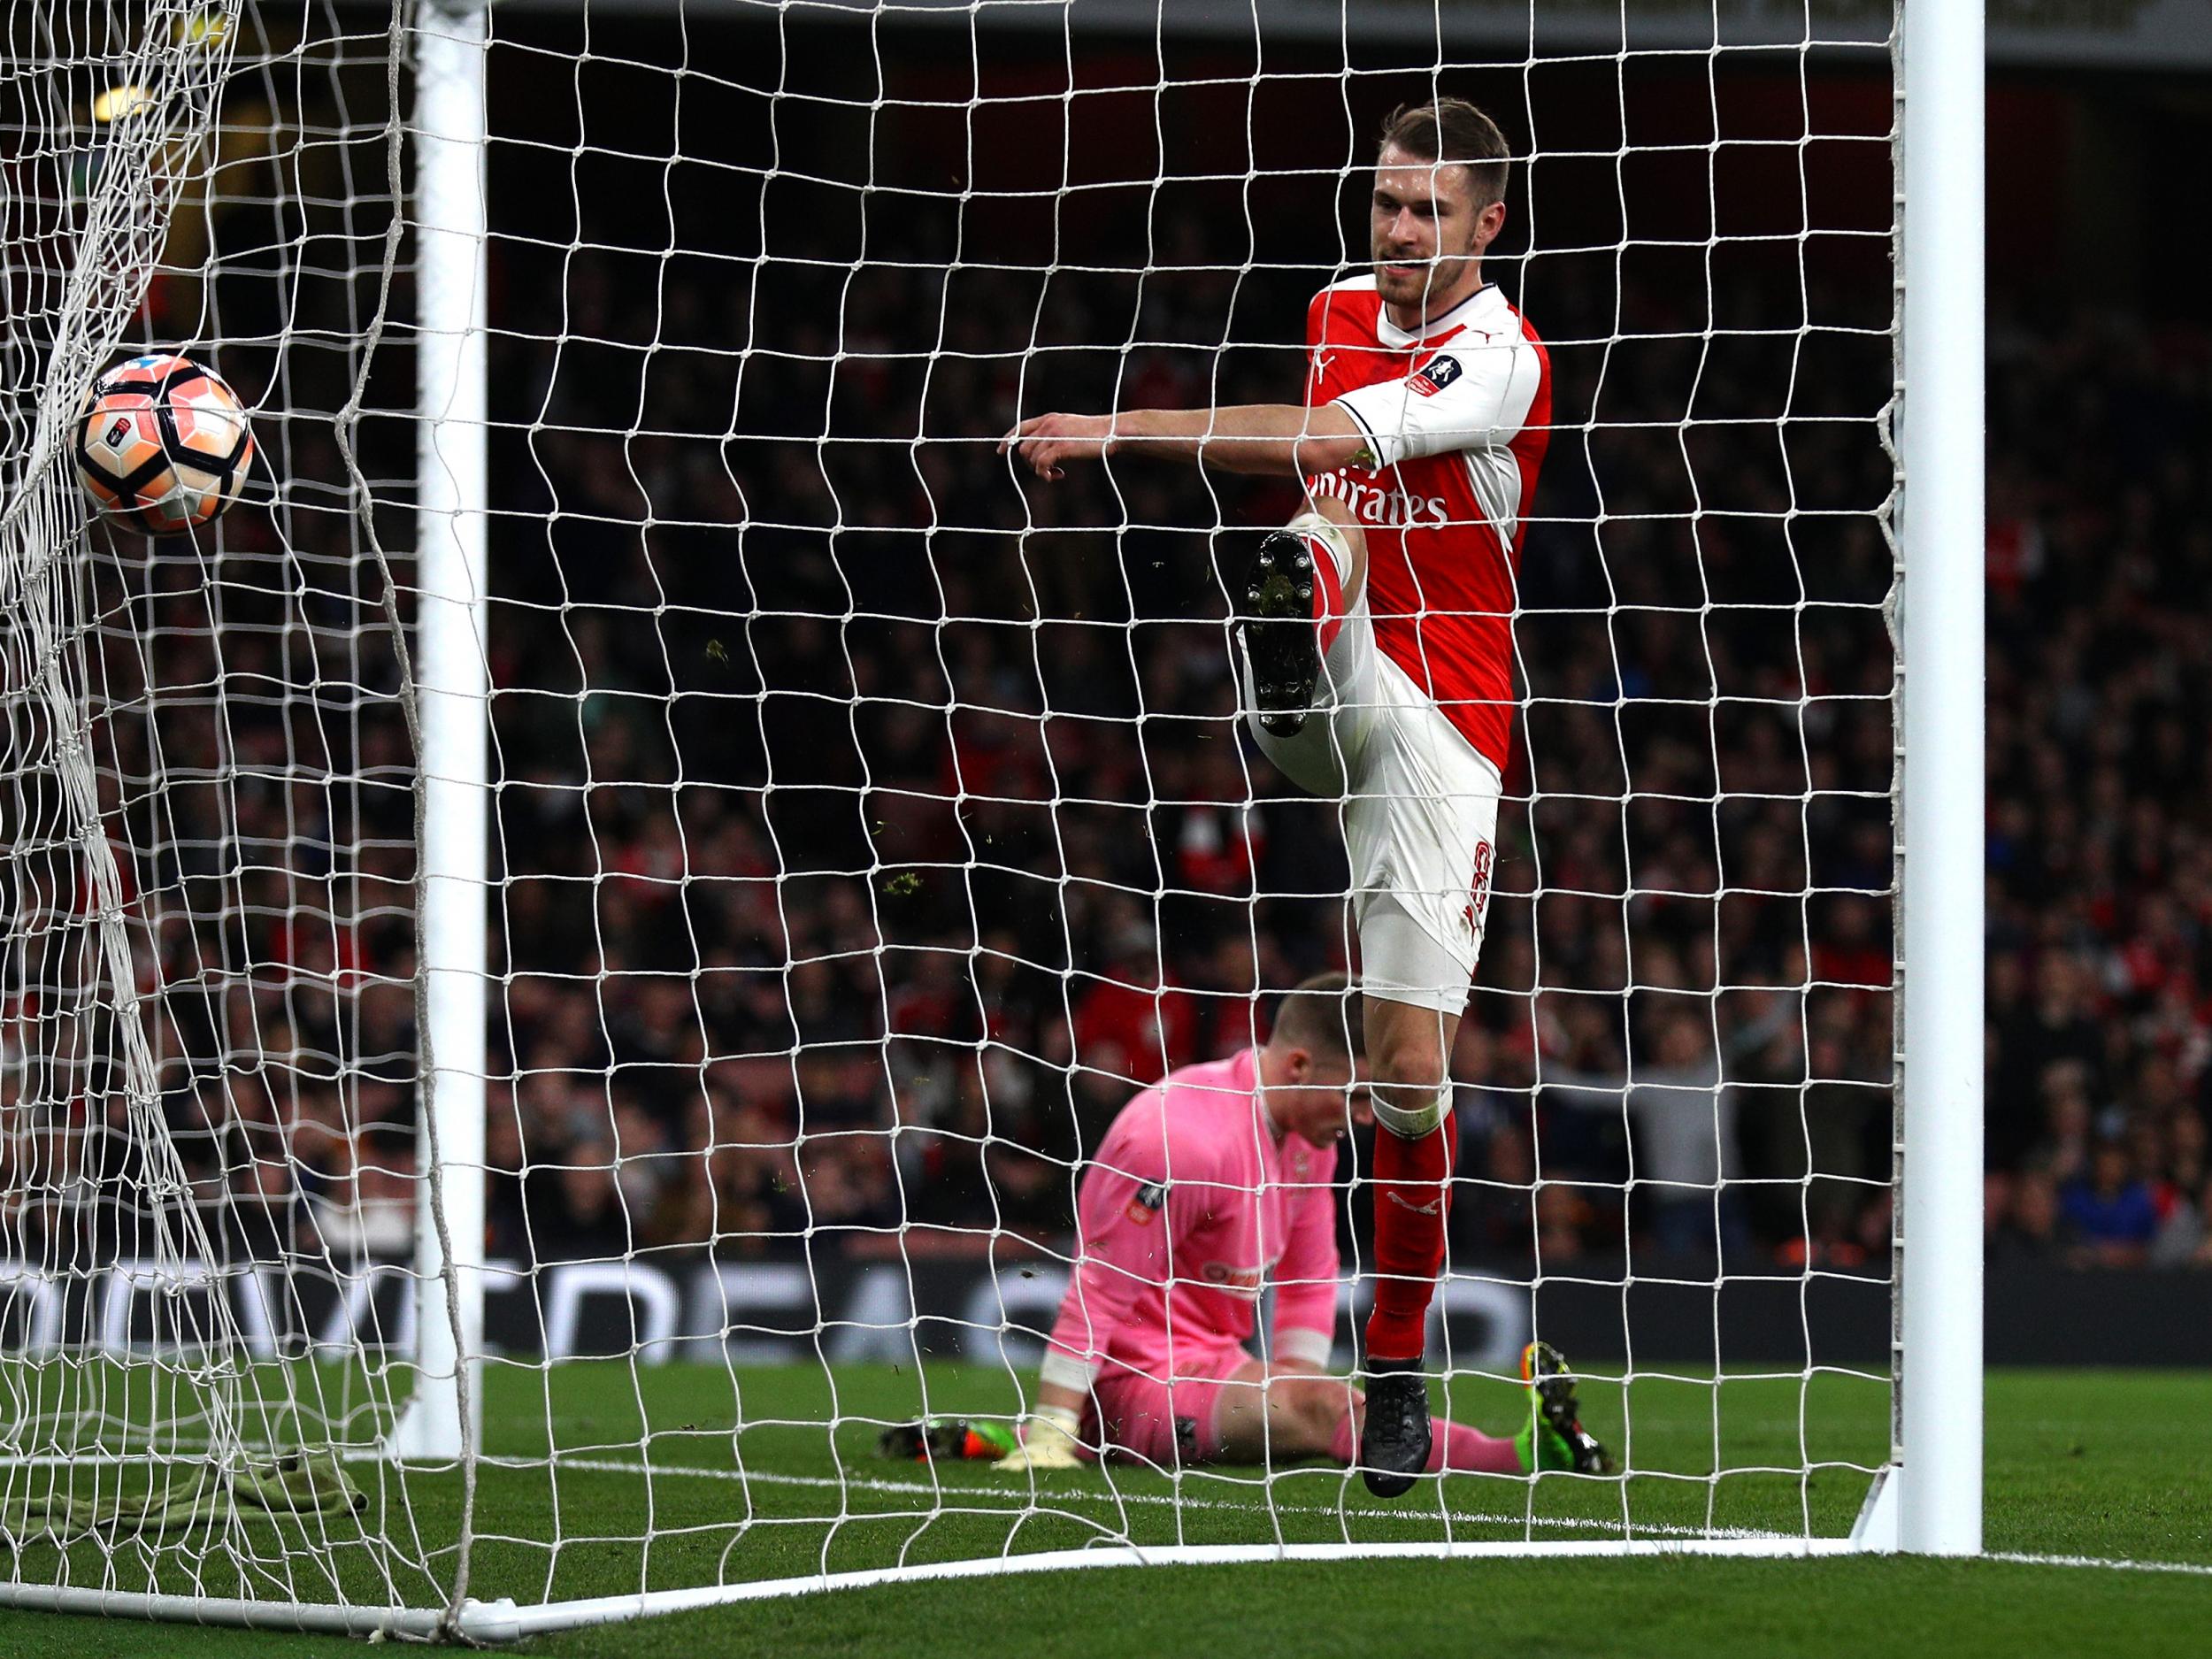 Ramsey walked in Arsenal's fifth past a despairing Farman